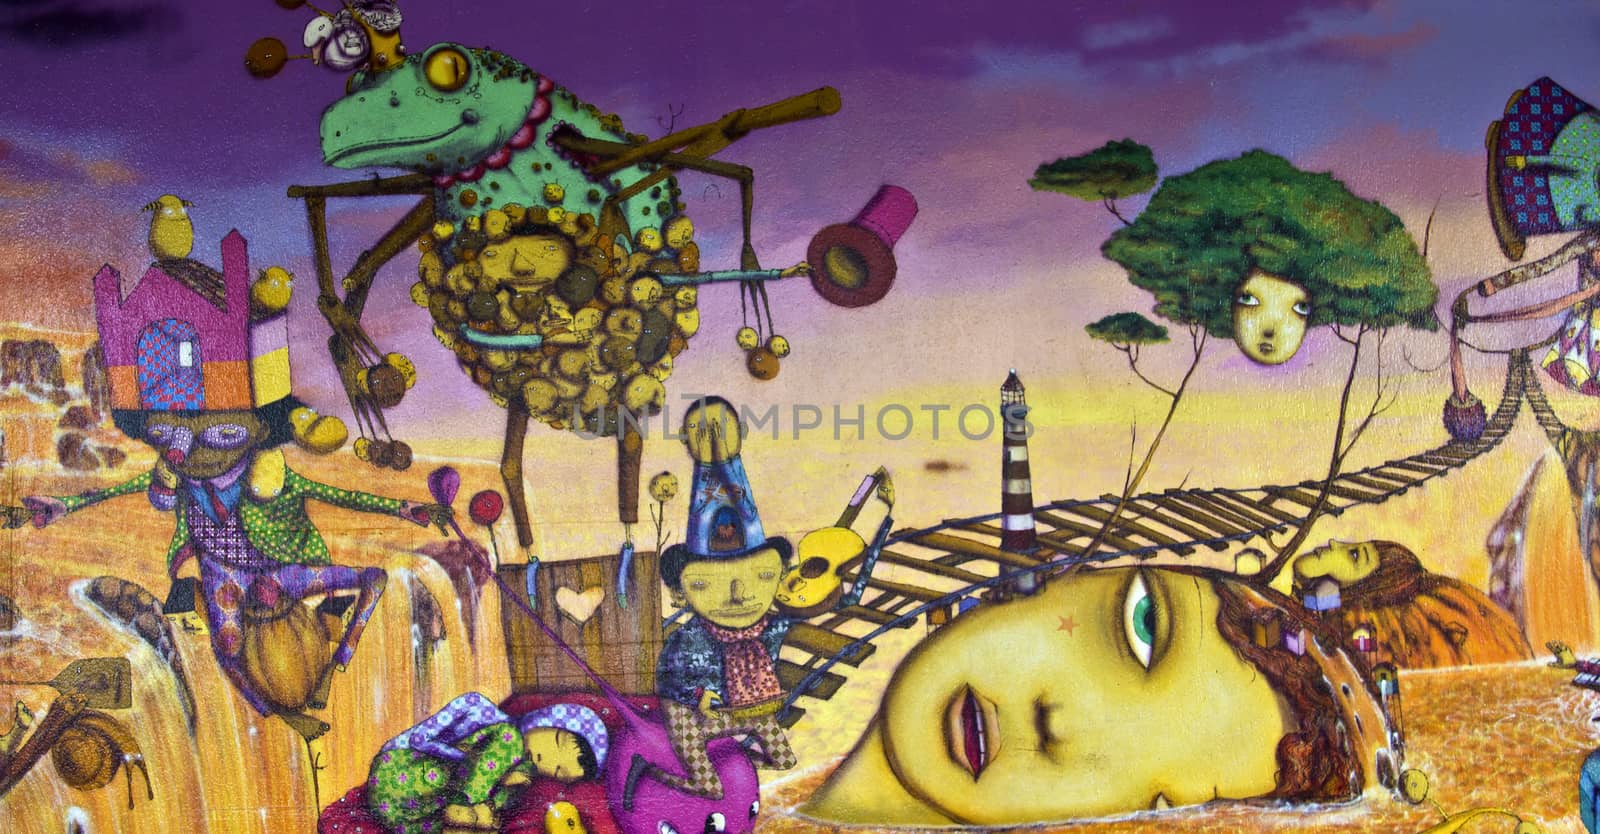 SAO PAULO, BRAZIL - MAY 30, 2015: An detail of one mural with graffiti of painters Gemeos in Ibirapuera Park, Sao Paulo, Brazil.